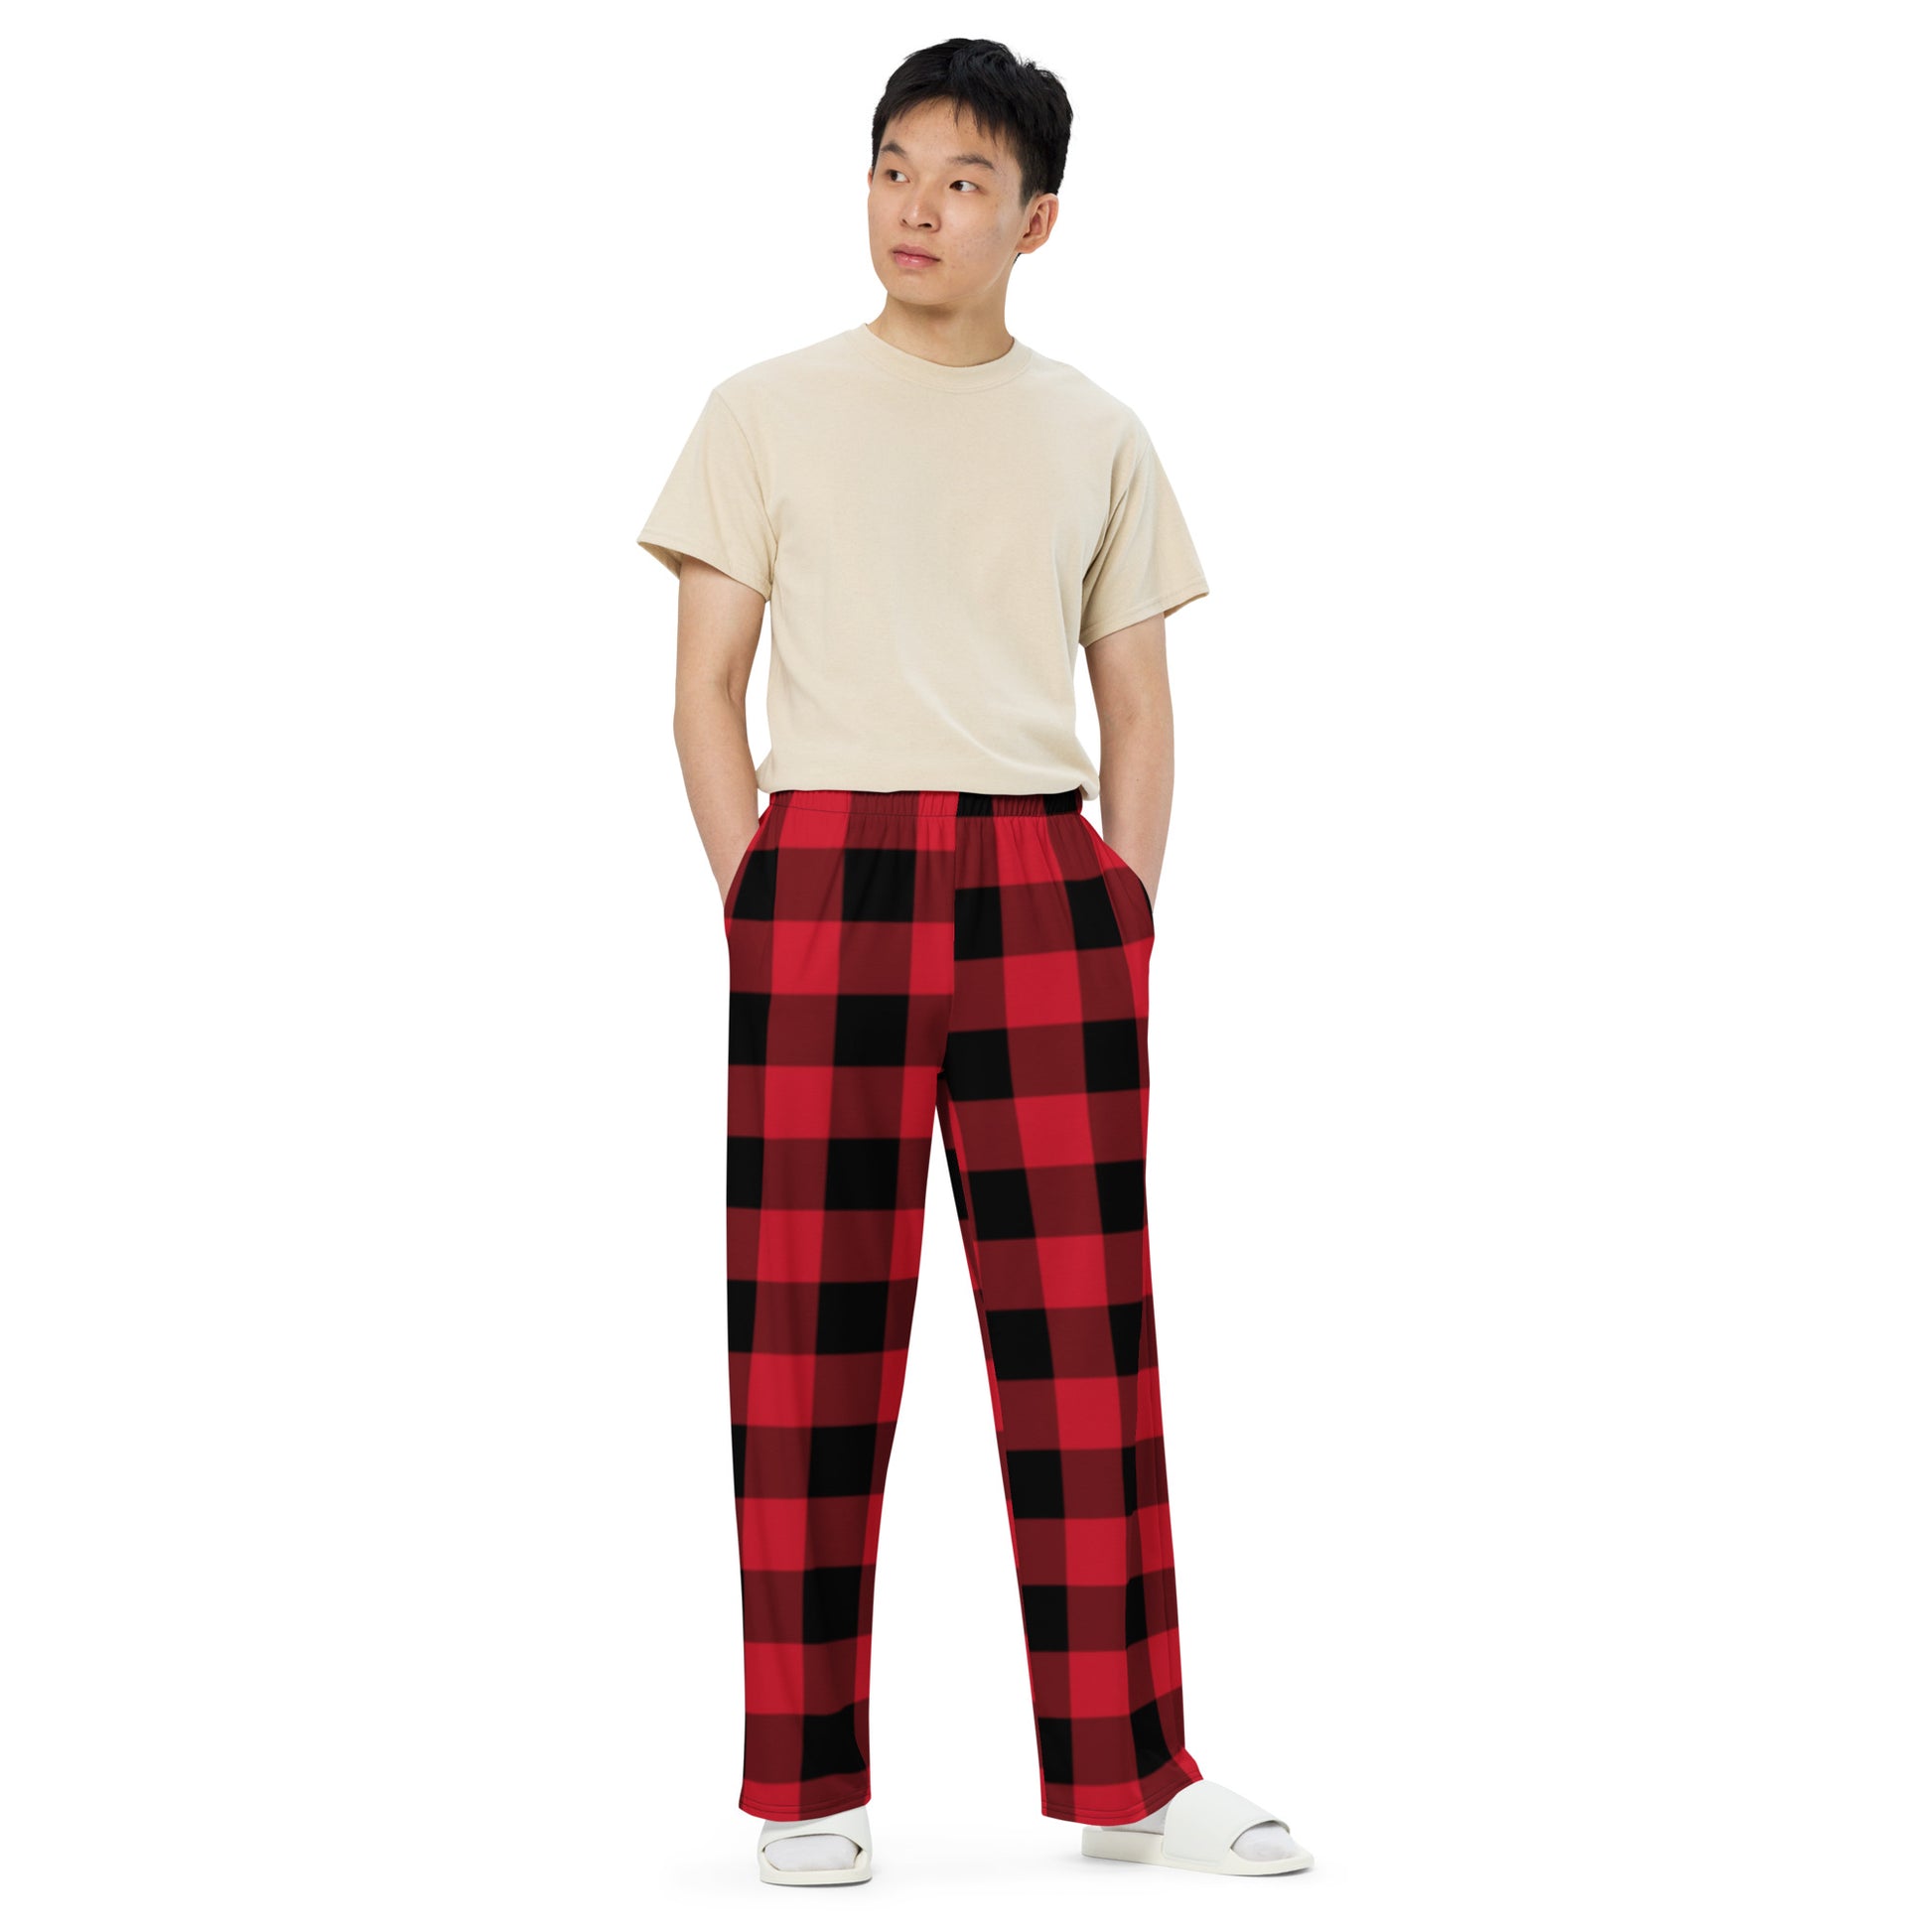 Different Touch Men's Pajama Lounge Pants Bottoms Fleece Sleepwear PJs with  Pockets Big & Tall (L, Red Buffalo Plaid) at  Men's Clothing store